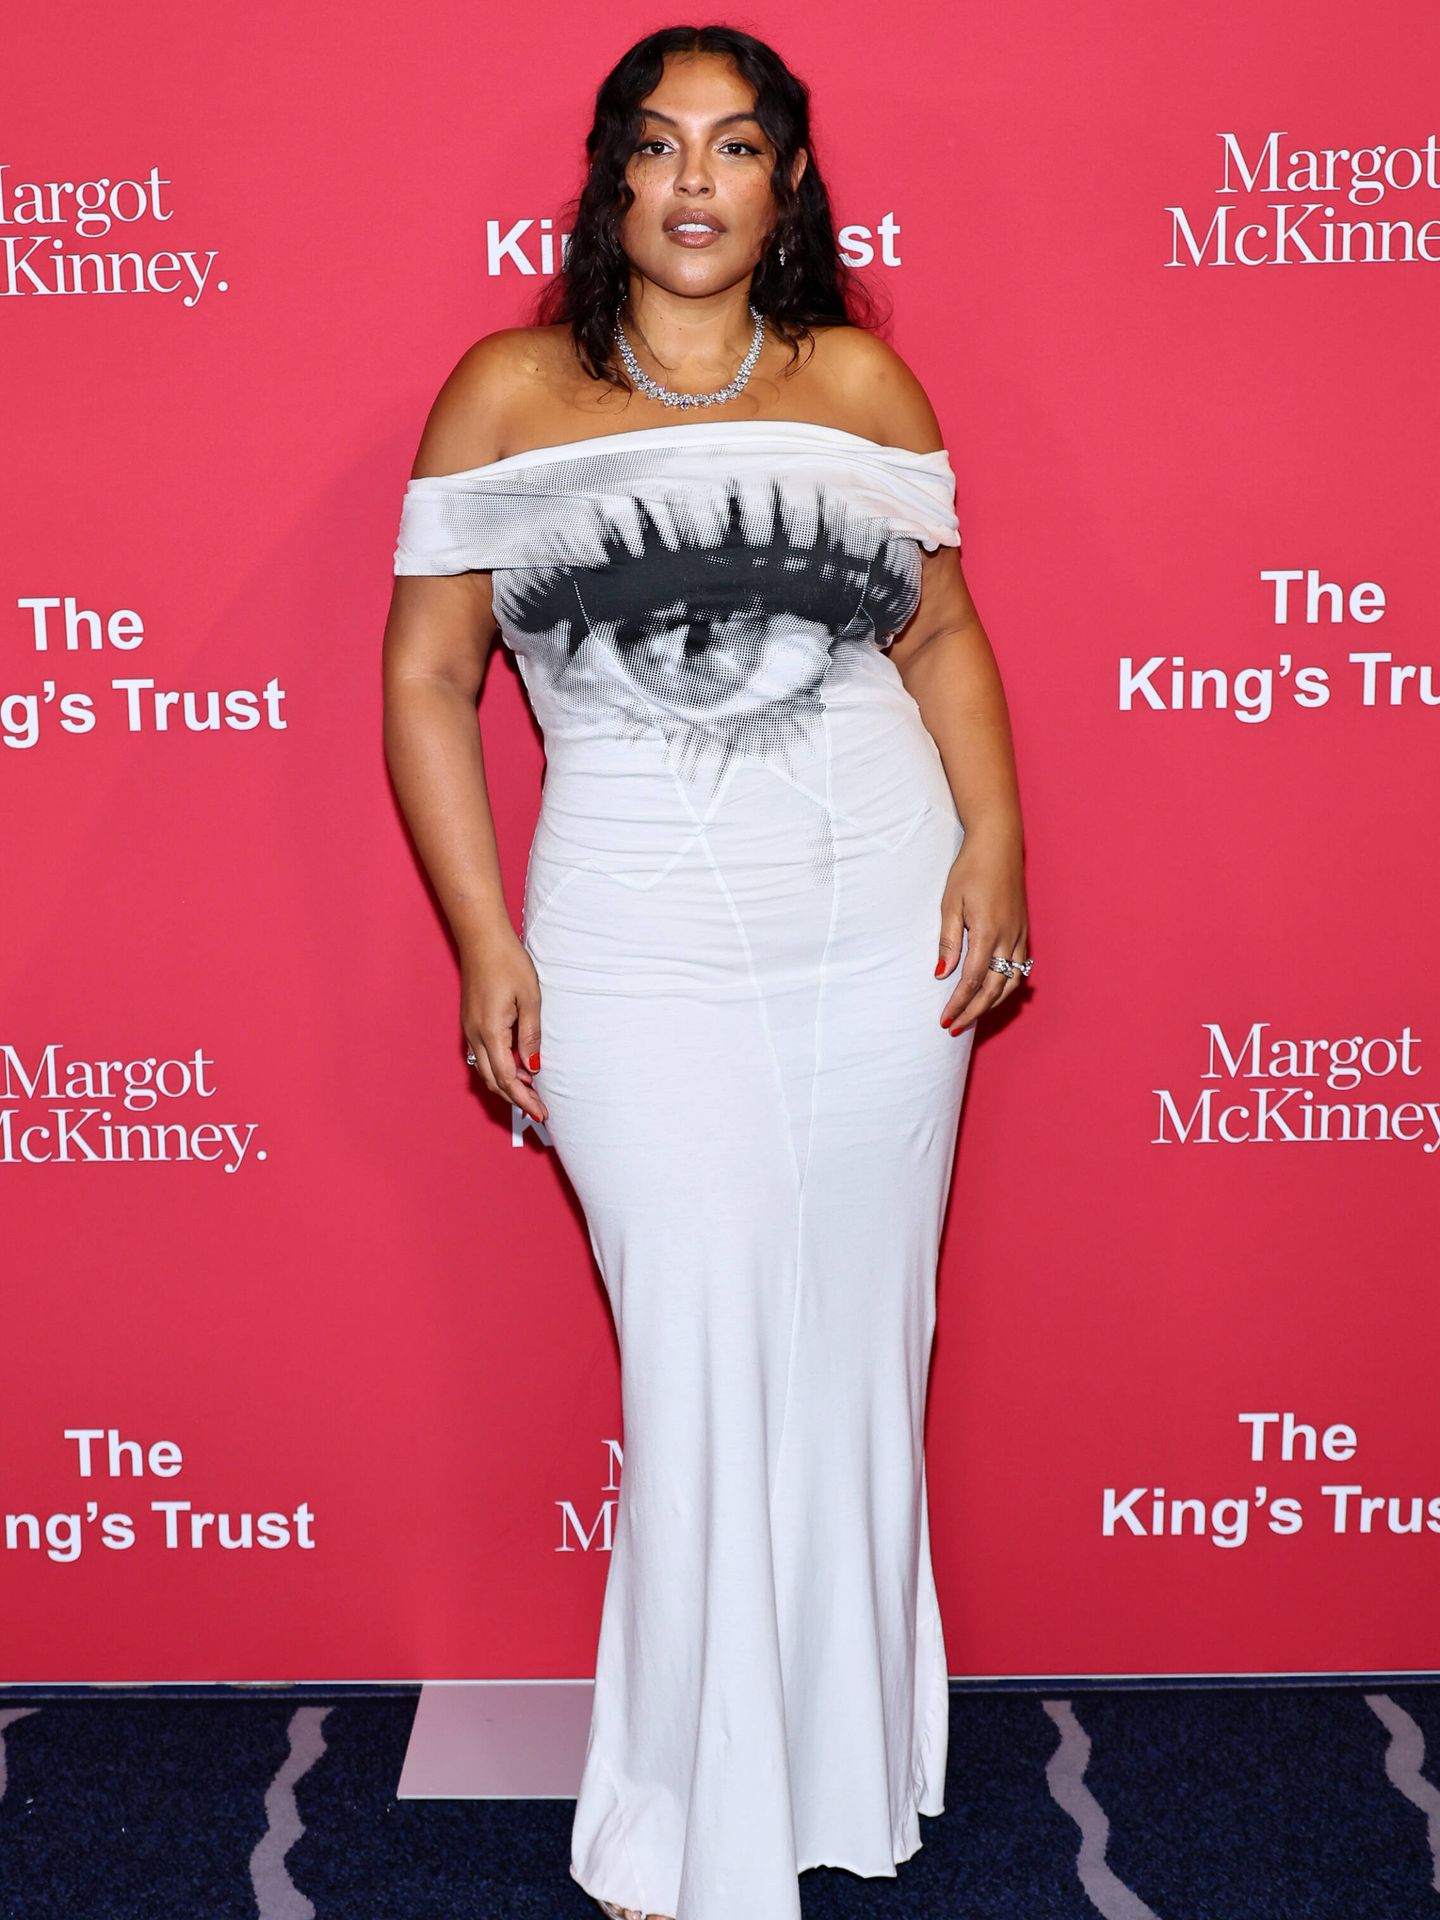 Paloma Elsesser. (Getty Images)